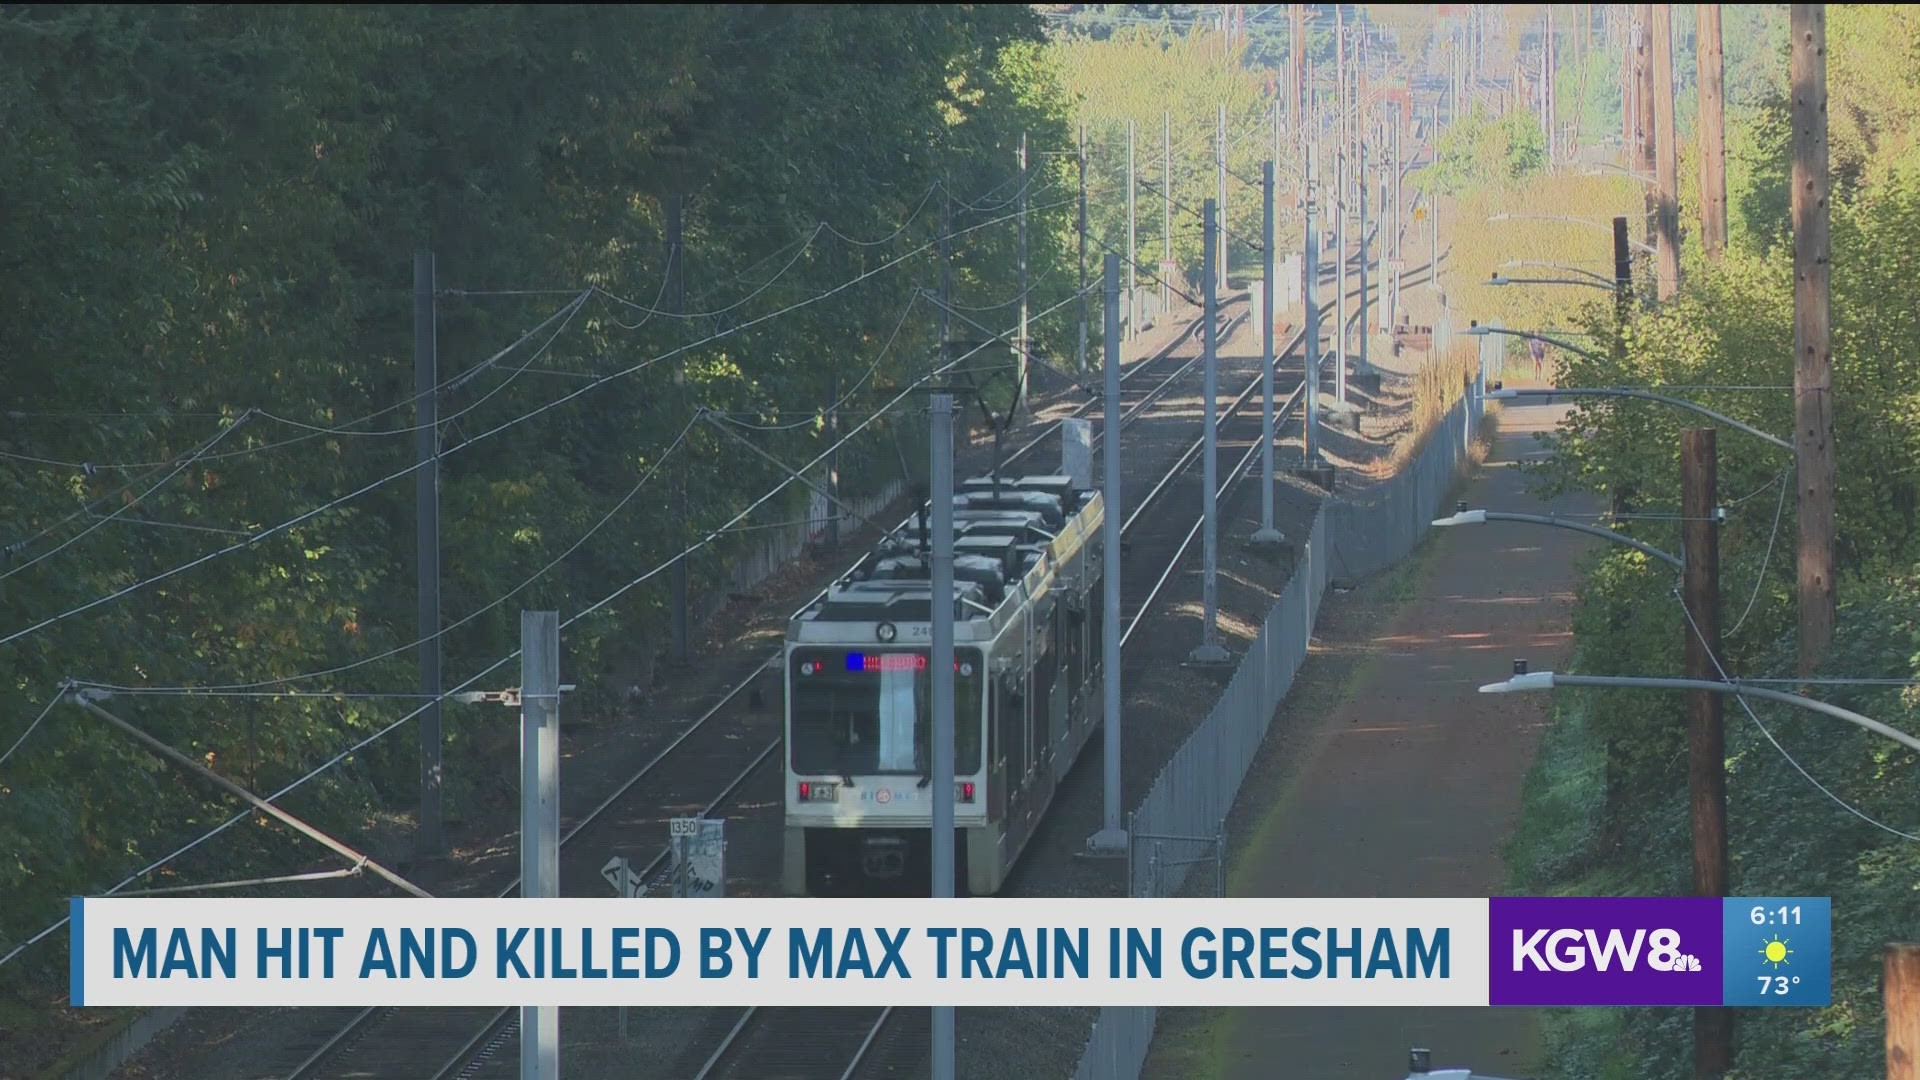 Gresham police said the man may have been wearing headphones when he was hit. Investigators are looking into whether that contributed to the crash.